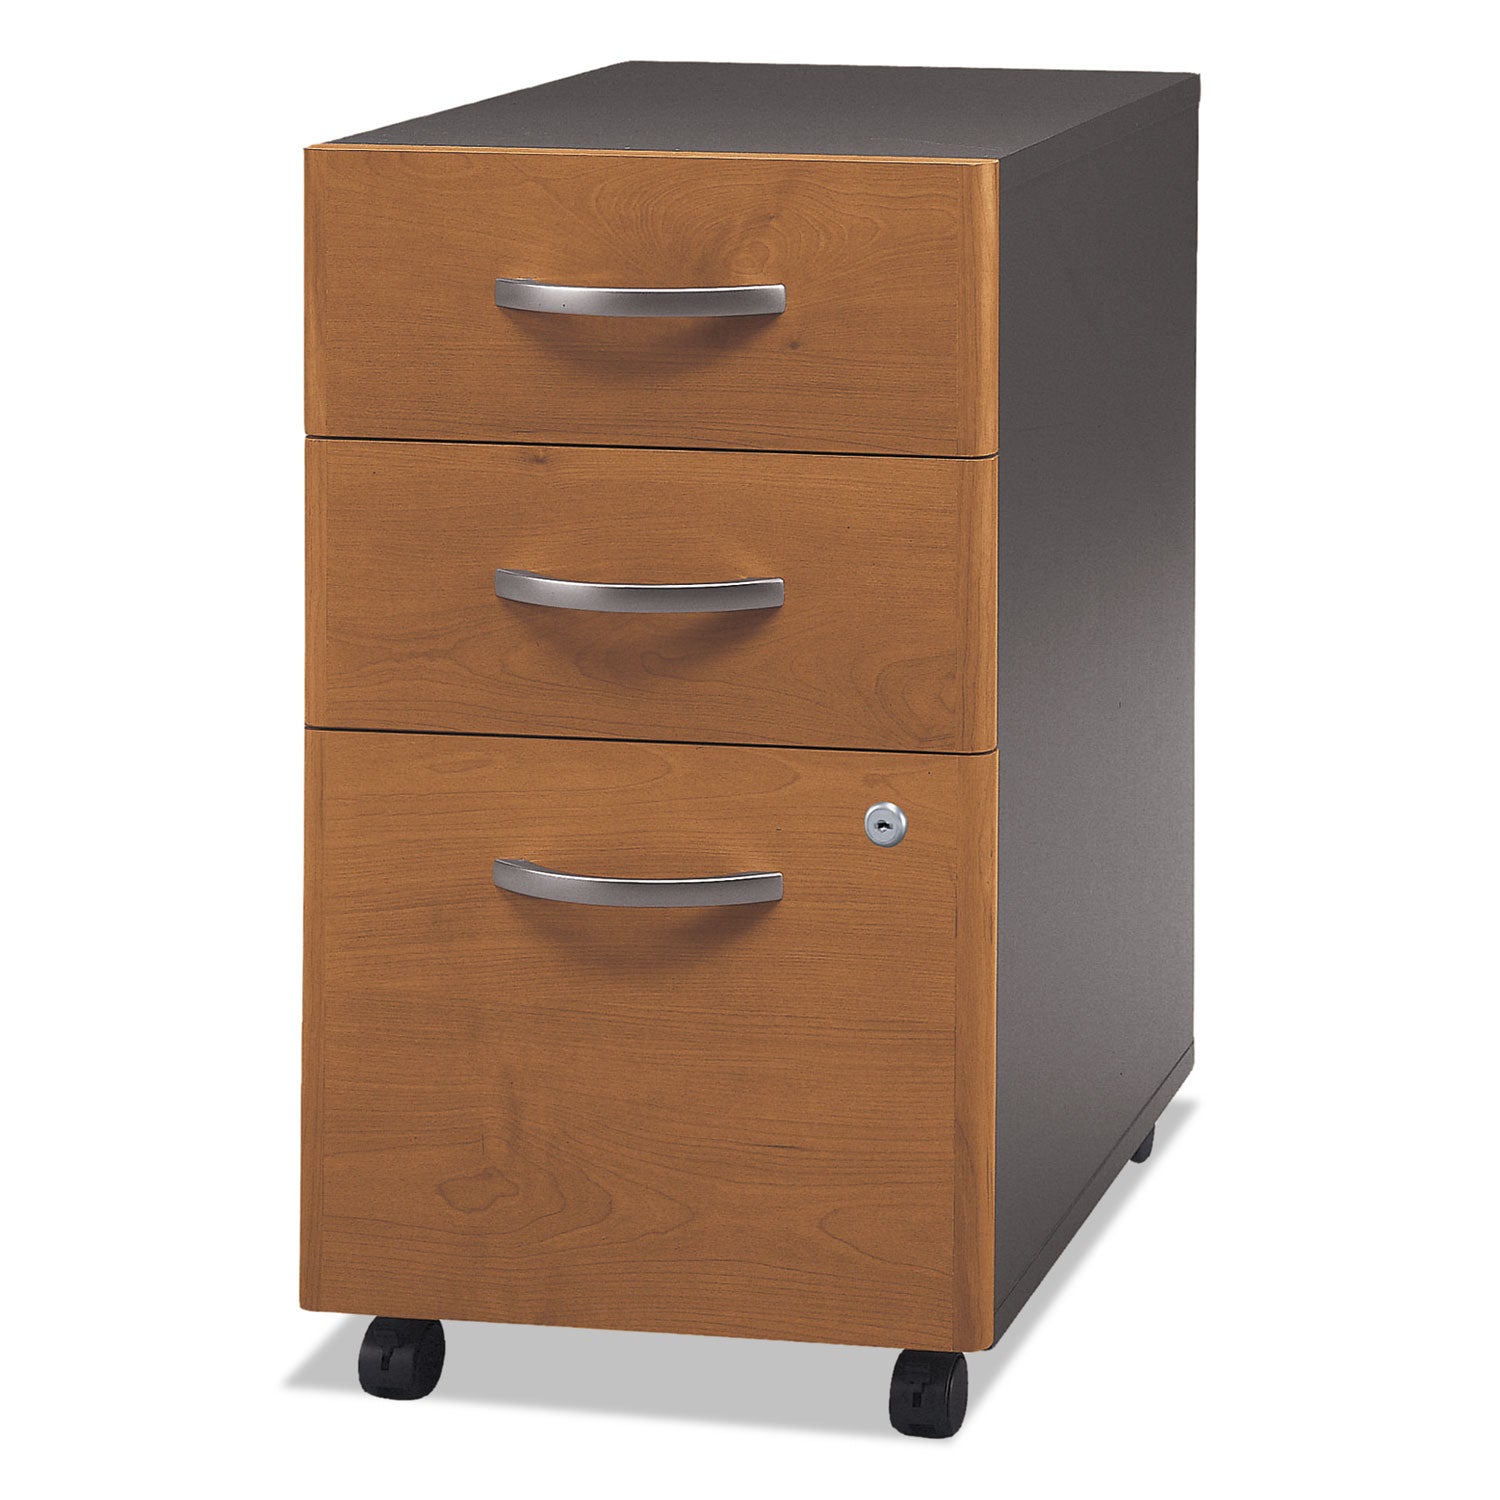 Series C Mobile Pedestal File, Left/Right, 3-Drawers: Box/Box/File, Legal/Letter/A4/A5, Cherry/Gray, 15.75" x 20.25" x 27.88 - 